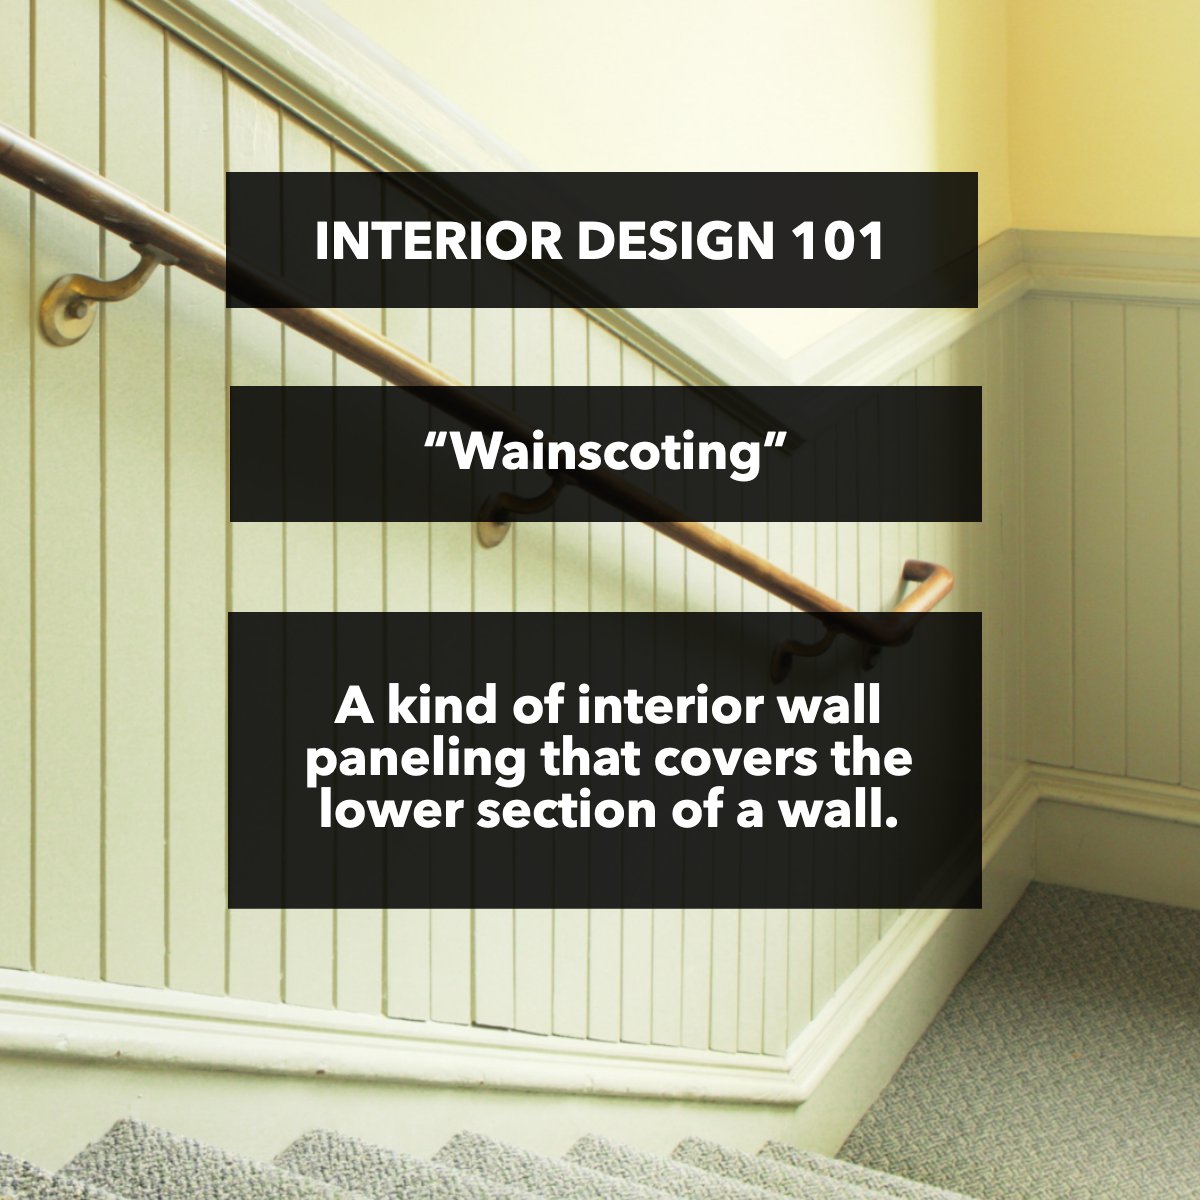 Have you ever heard the term wainscoting? 

✨ The more you know 

#interiorsdesign #interiortrends #interiordesigning #interiordesigntrends #interiorsaddict